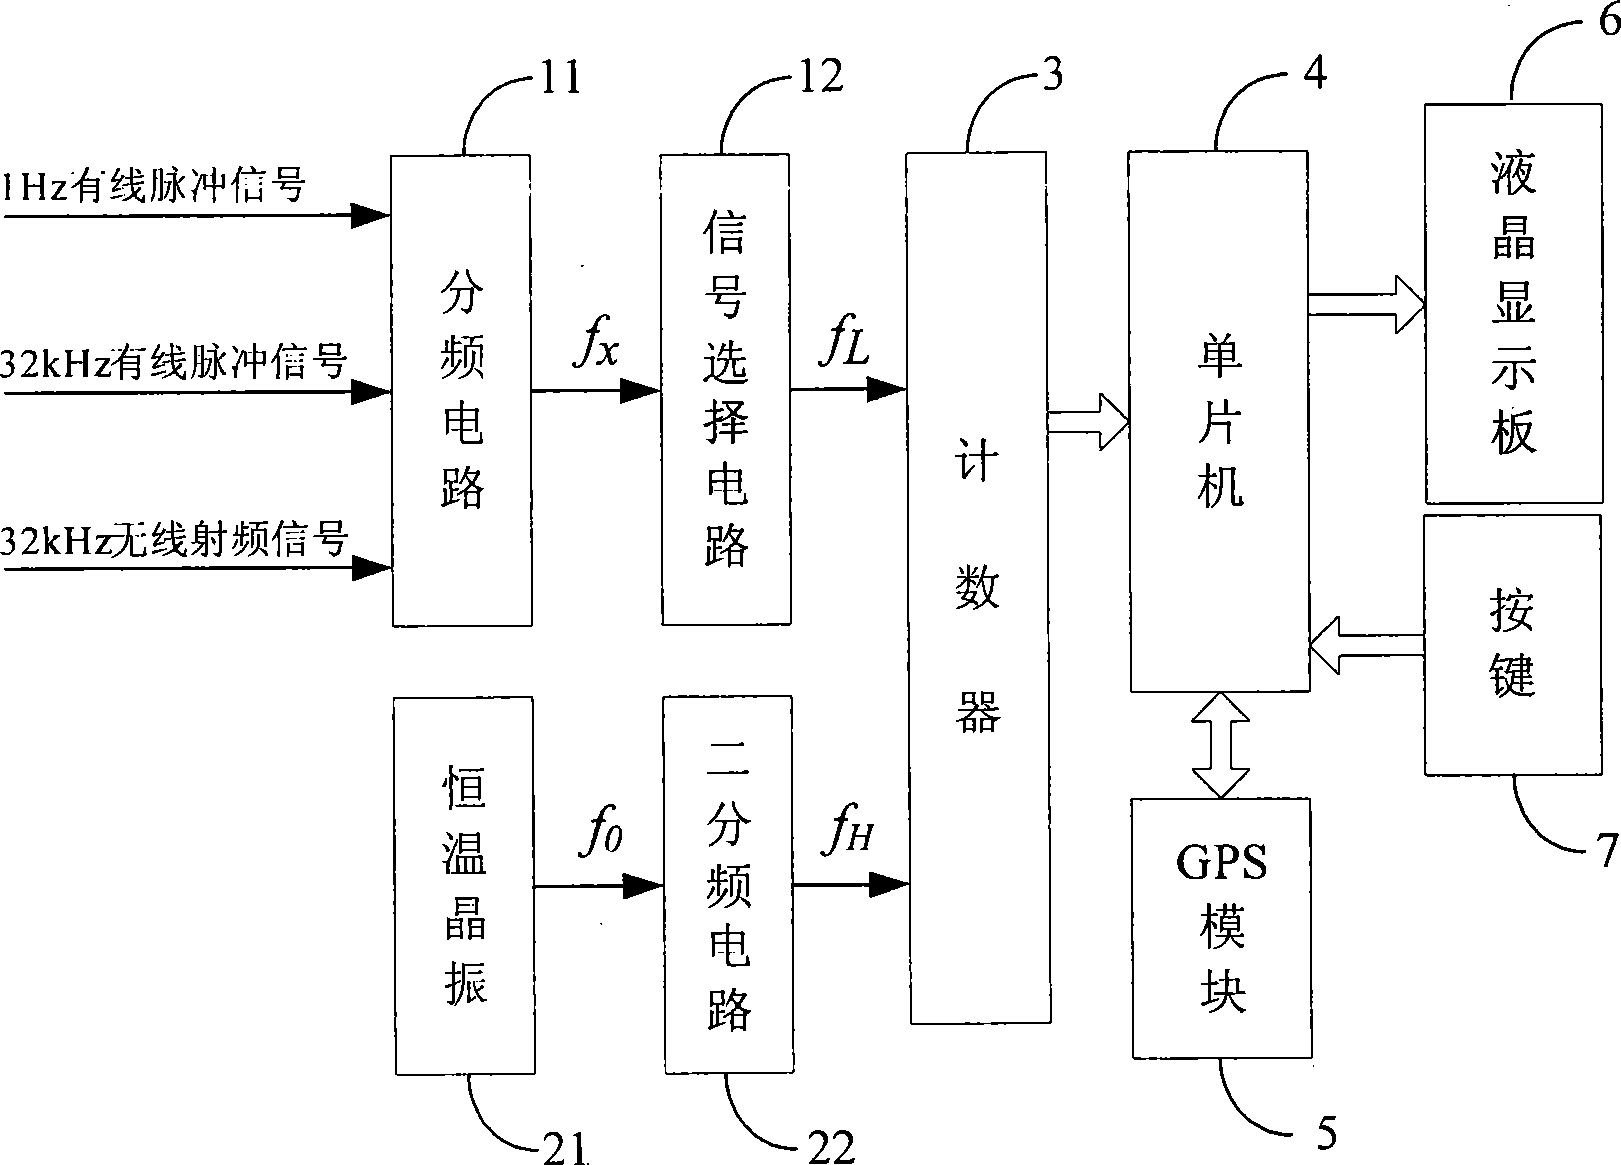 GPS time service and clock calibrating device for electric power measurement